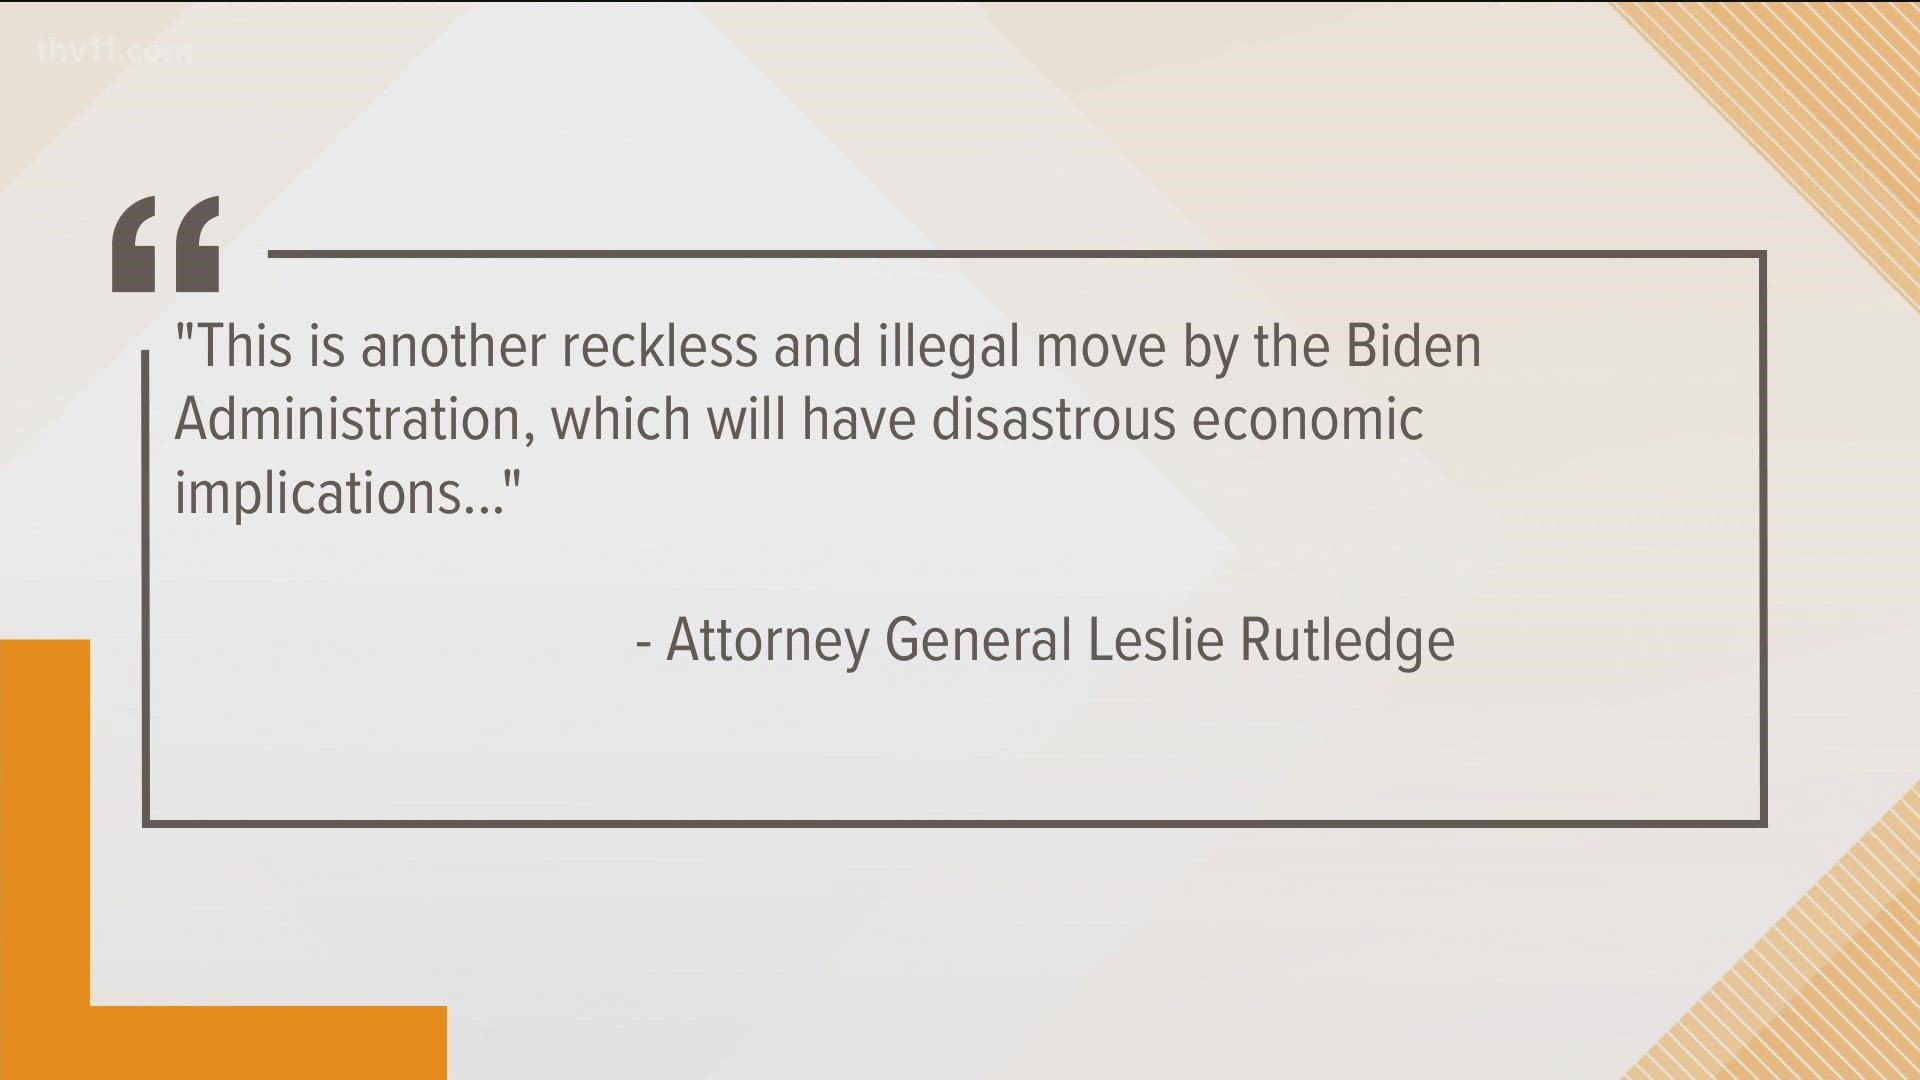 “I will not allow President Biden to force hardworking Americans to either get the shot or lose their jobs,” Rutledge states in the release.